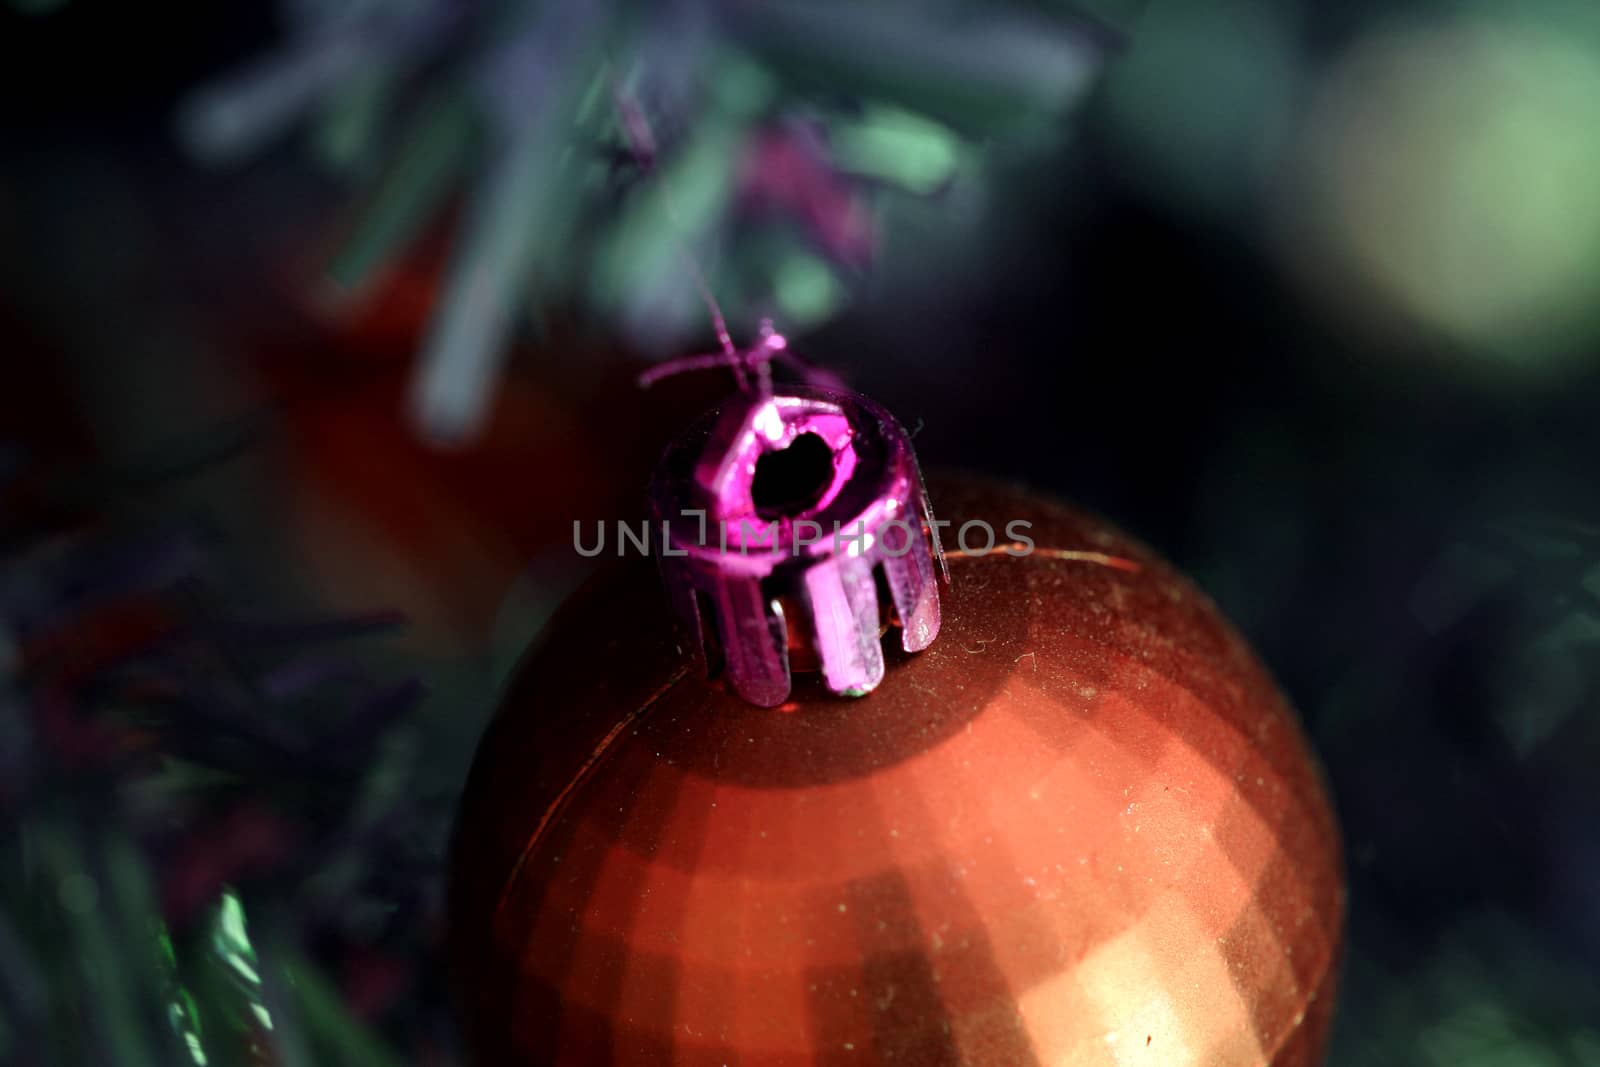 Close up of Christmas ornaments on tree.